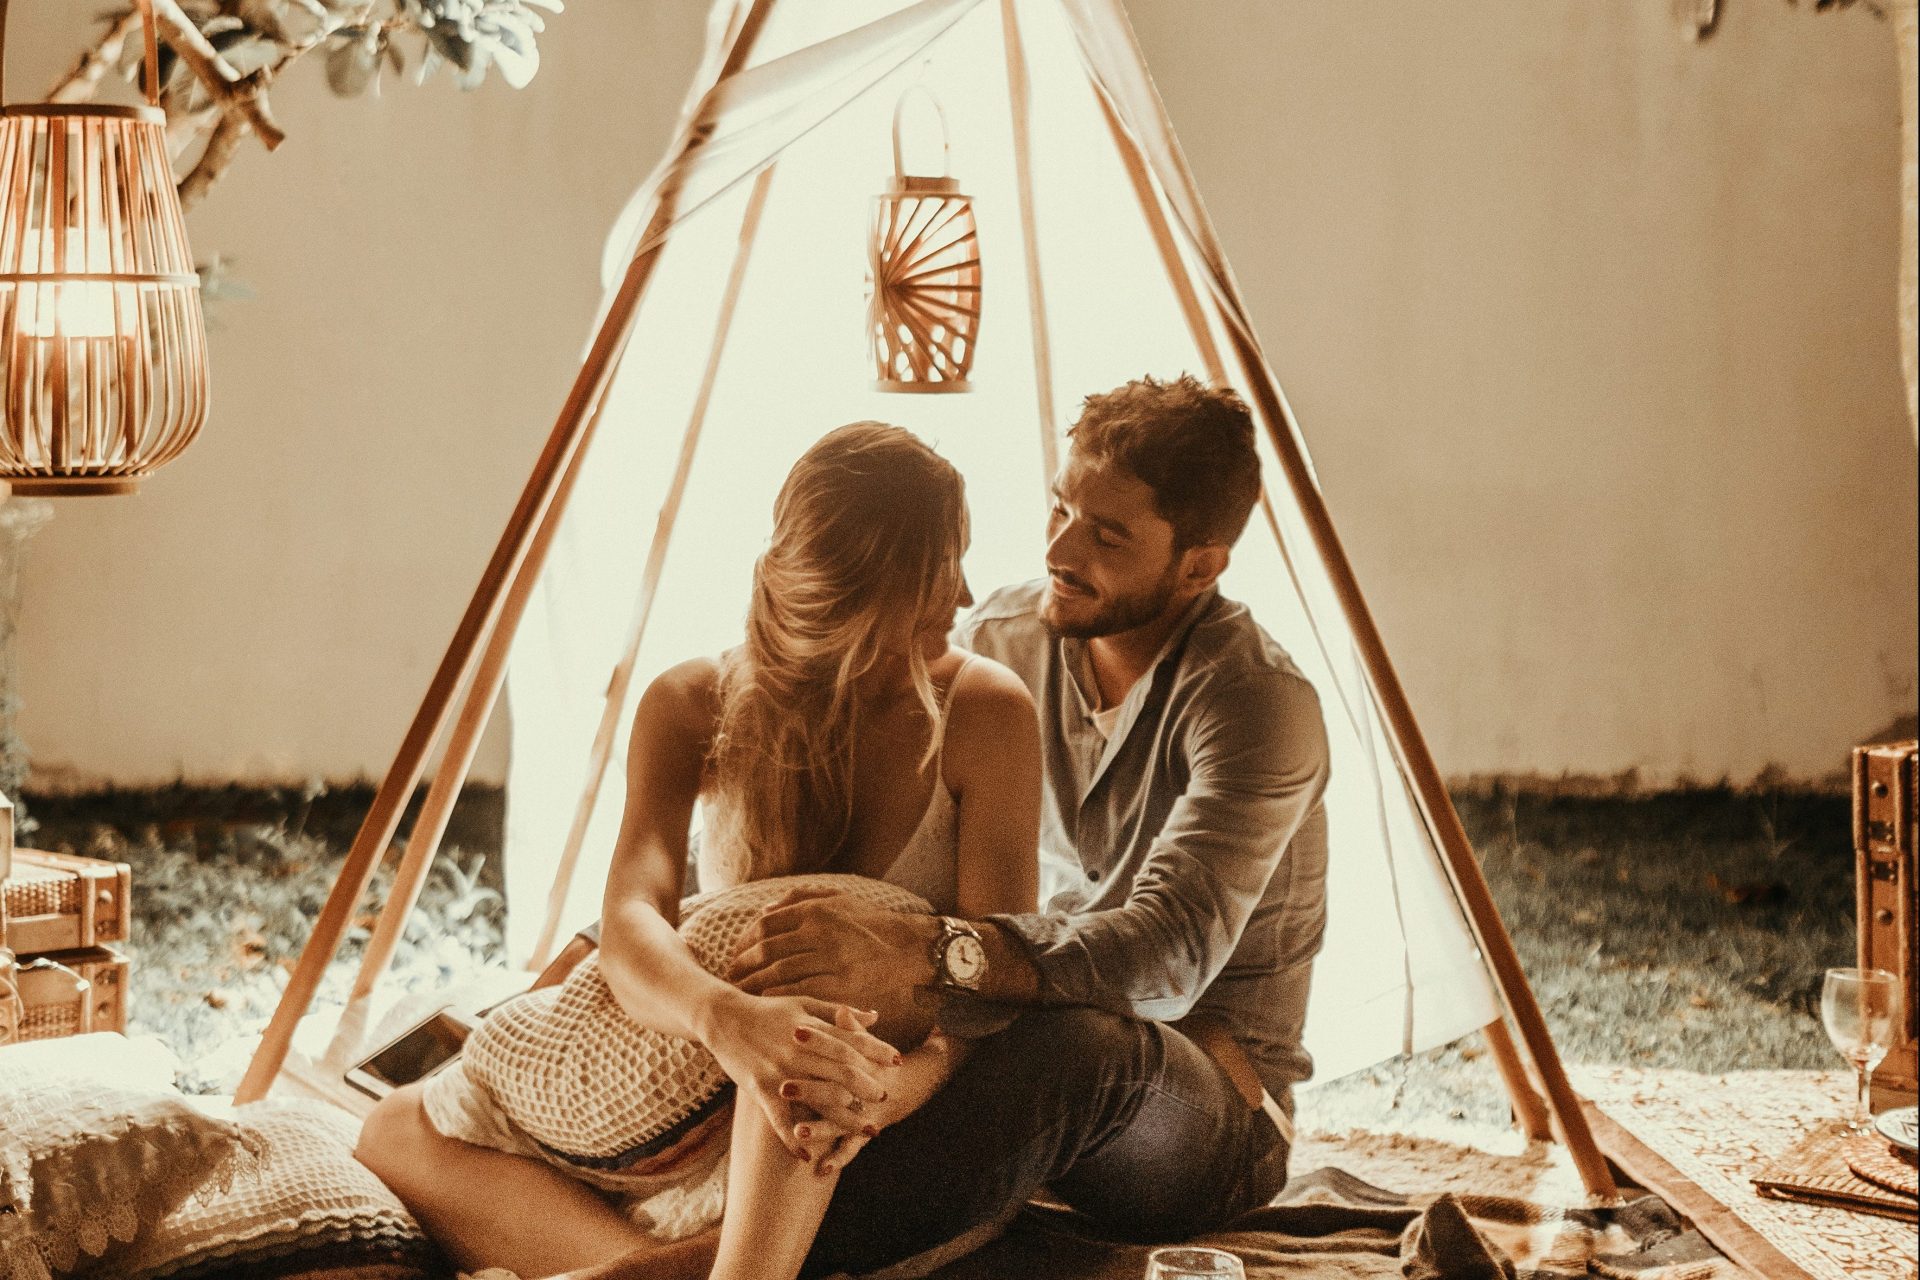 Ranking The Myers-Briggs Personality Types By Who's The Most Relaxed Partner To Who's The Most Possessive